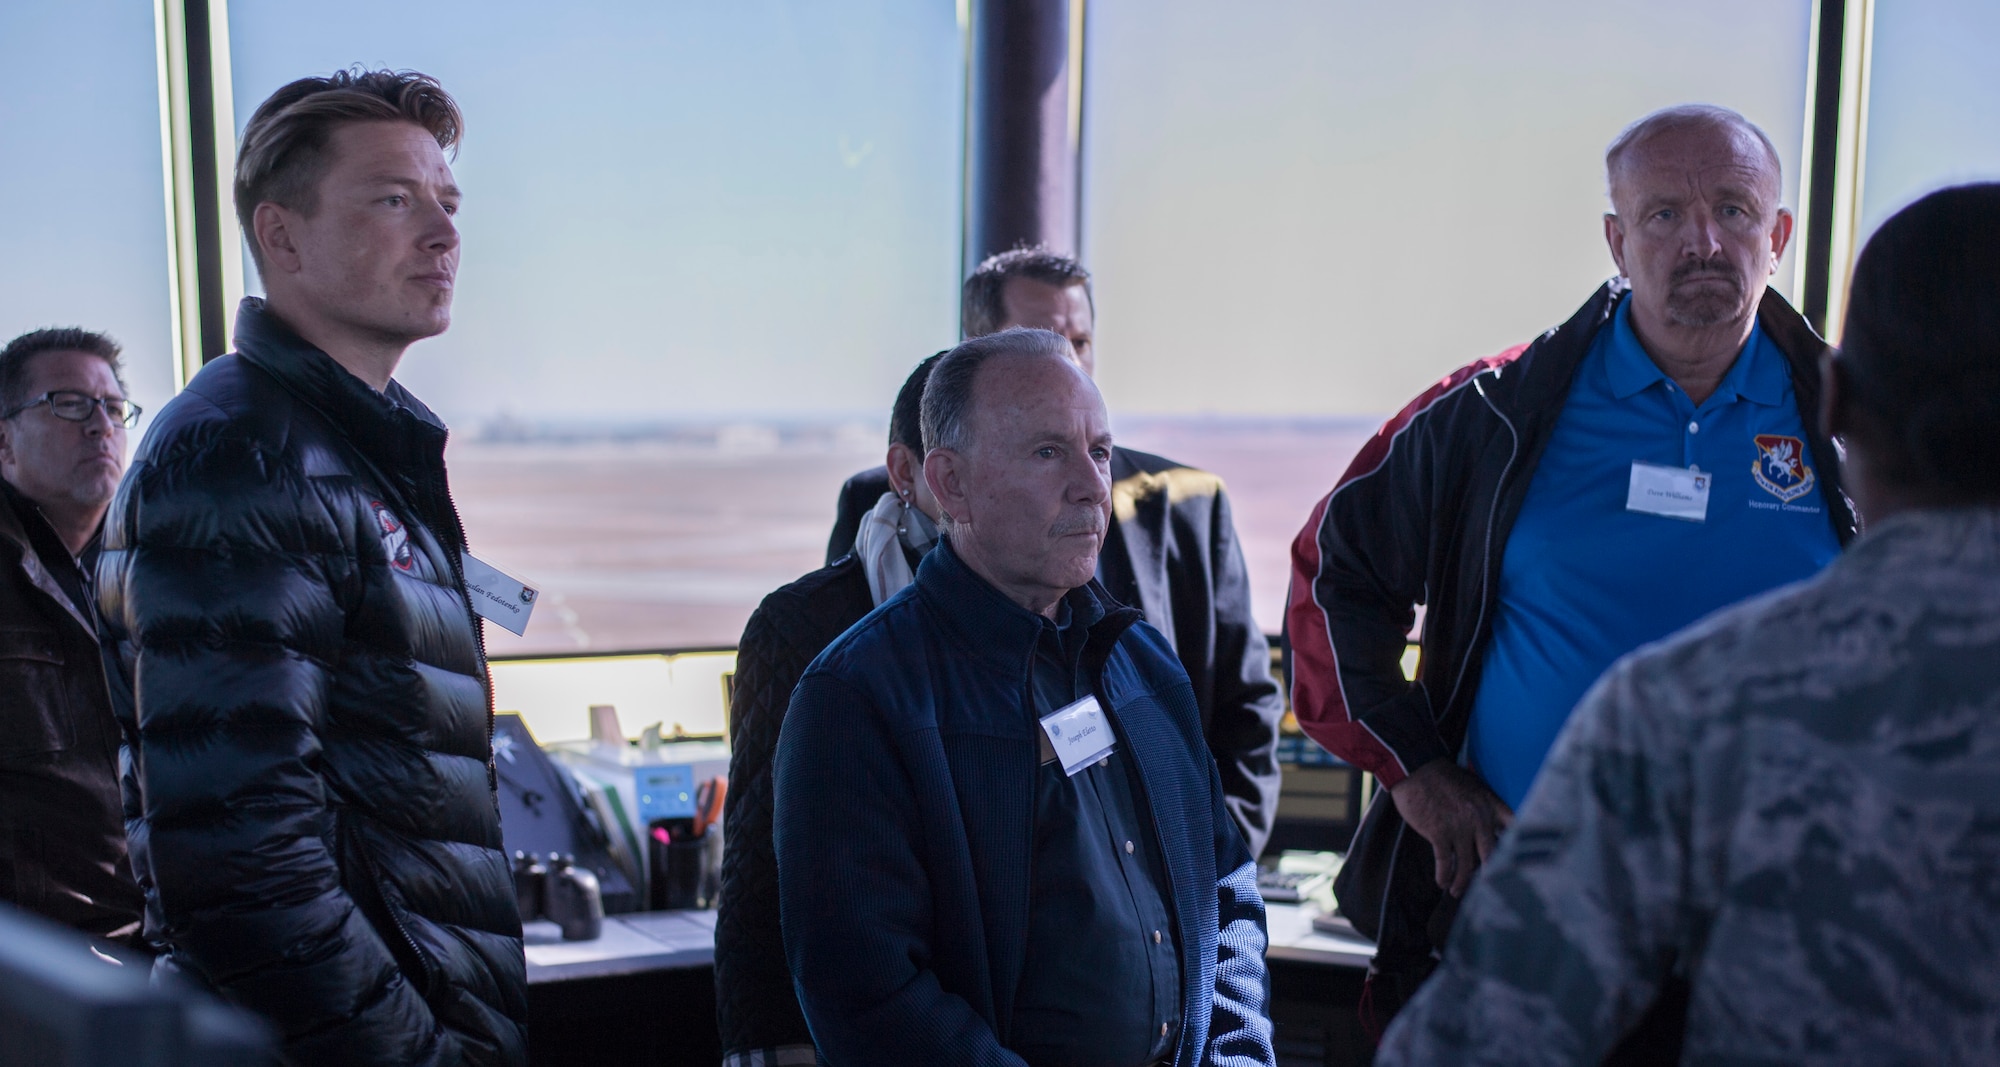 Honorary commanders receive a mission brief in the air traffic control tower during an immersion tour at MacDill Air Force Base, Fla., Jan. 18, 2018.